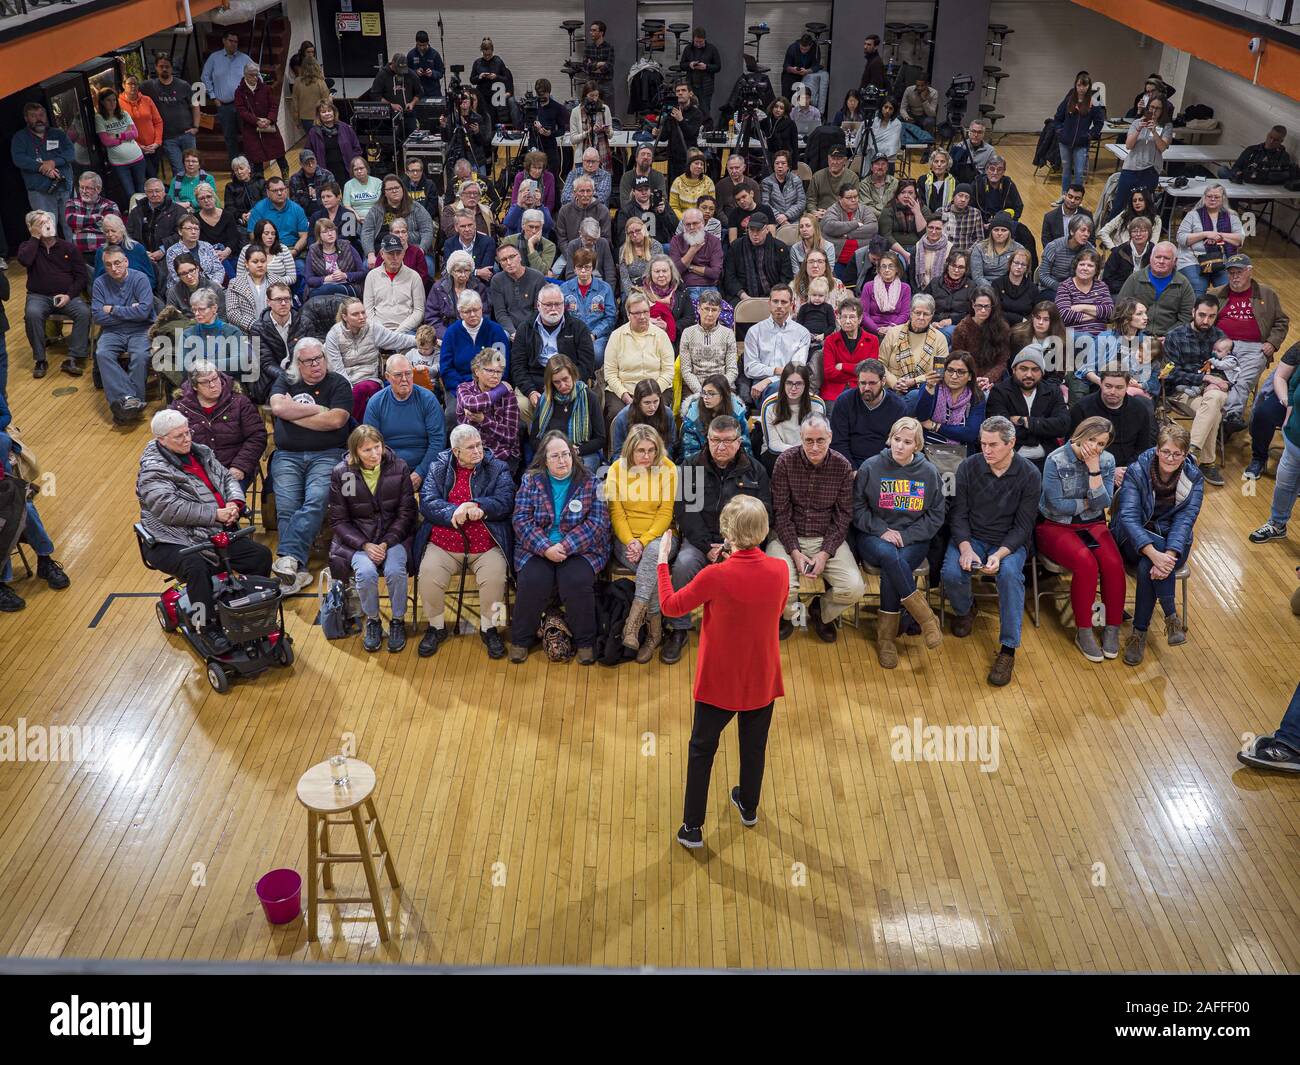 Washington, Iowa, USA. 15th Dec, 2019. US Senator ELIZABETH WARREN (D-MA) speaks to a crowd of about 200 people during a campaign event at Washington Middle School in Washington, IA, Sunday. Warren is campaigning in southeastern Iowa this weekend to support her effort to be the Democratic nominee for the US presidential race in 2020. Iowa traditionally hosts the first presidential selection event of the campaign season. The Iowa caucuses are Feb. 3, 2020. Credit: Jack Kurtz/ZUMA Wire/Alamy Live News Stock Photo